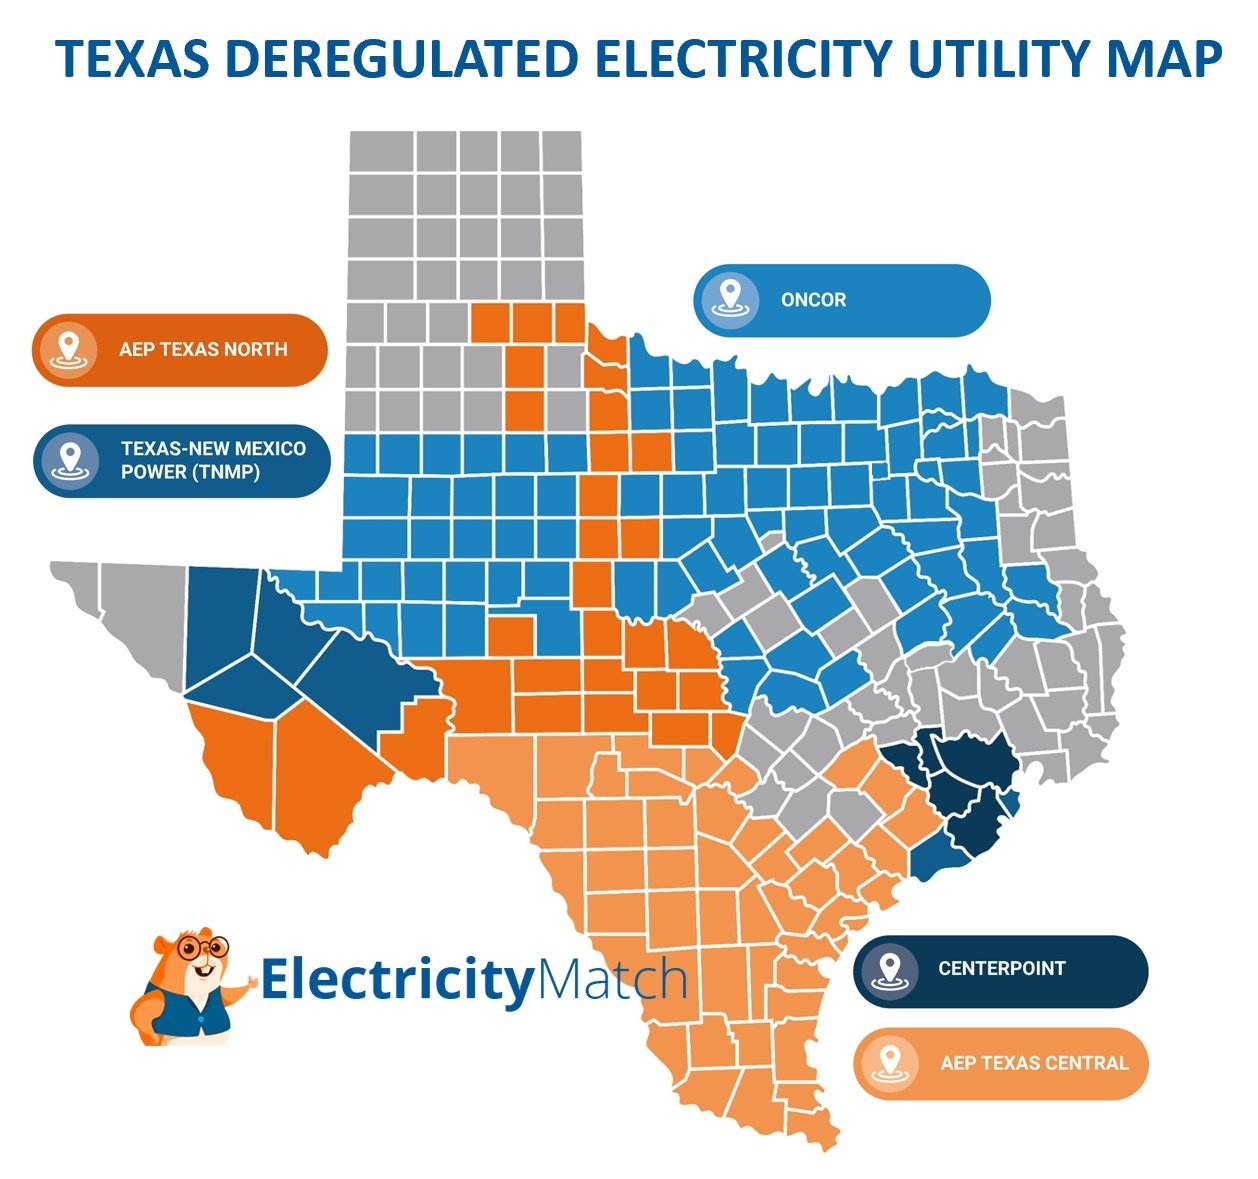 texas-deregulated-utility-map-electricity-match